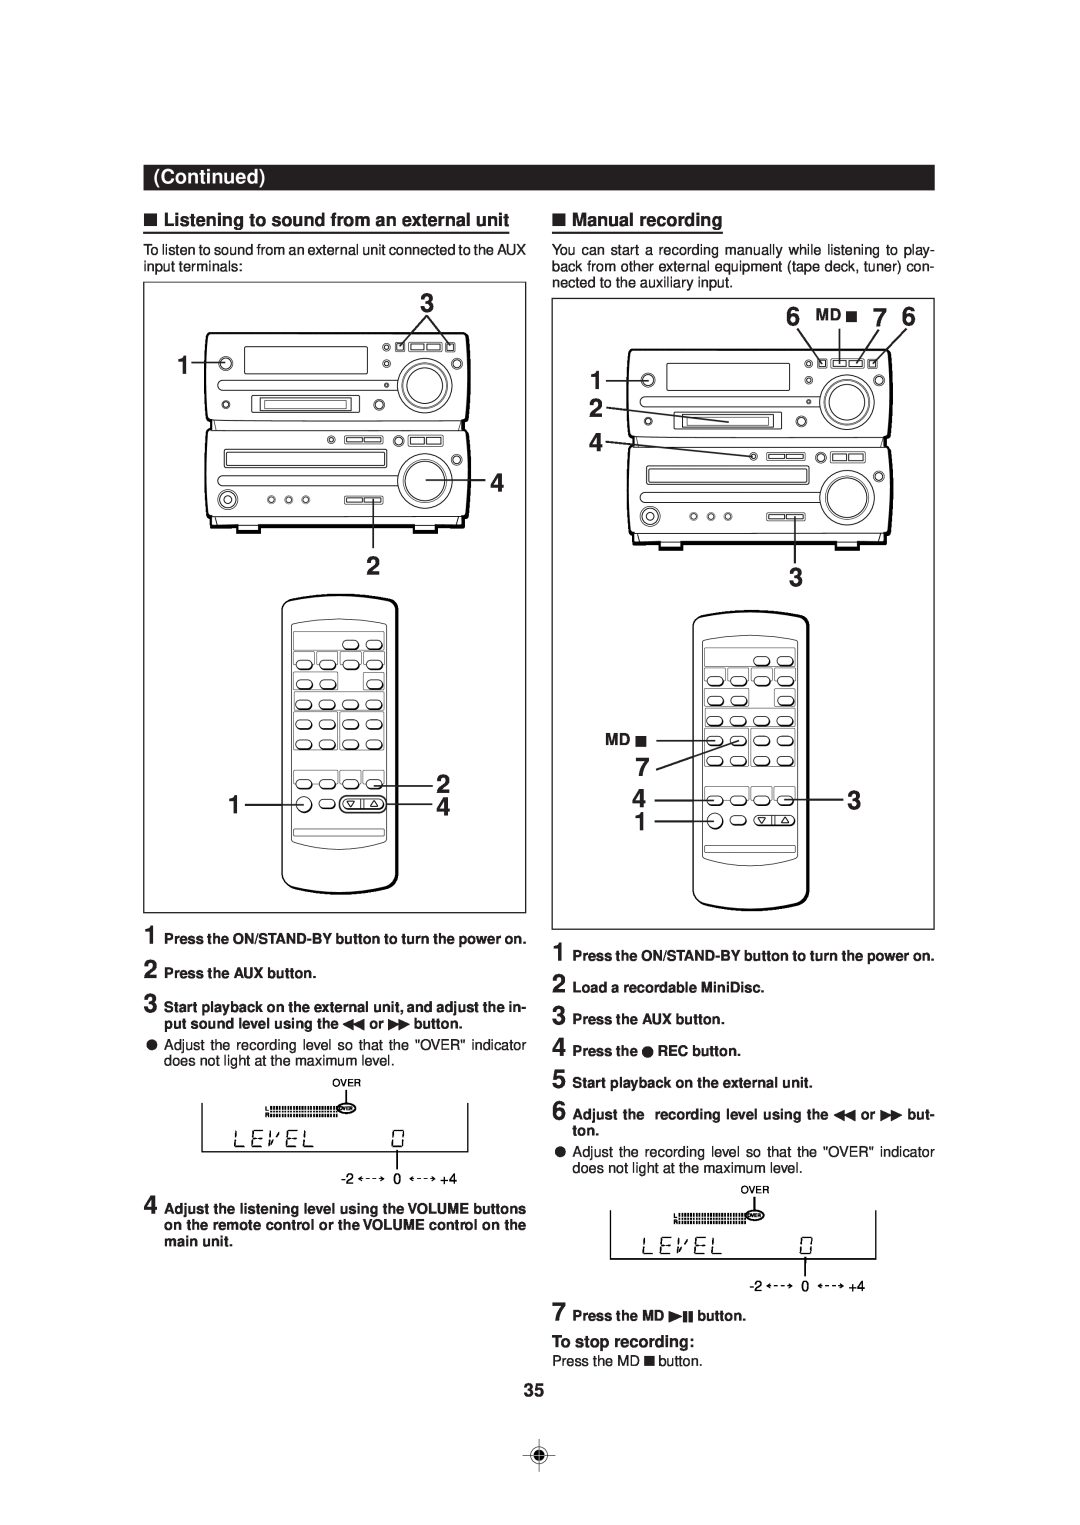 Sharp MD-MX30 MD operation manual Listening to sound from an external unit, Manual recording 